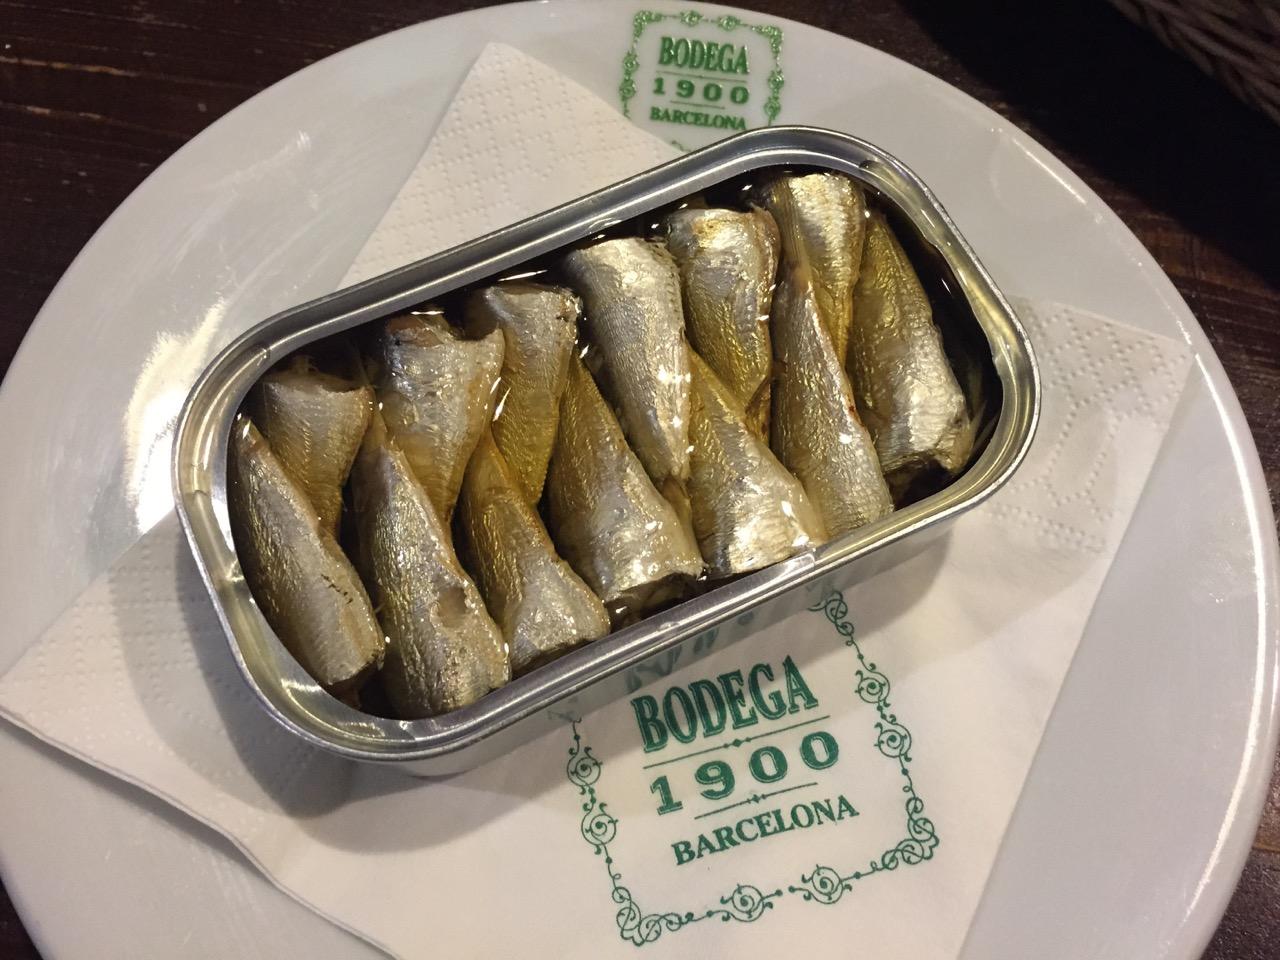 Sardines usually come in oil and vinegar, they're just beautiful, briny, full of that sort of rich oily, unctuousness.